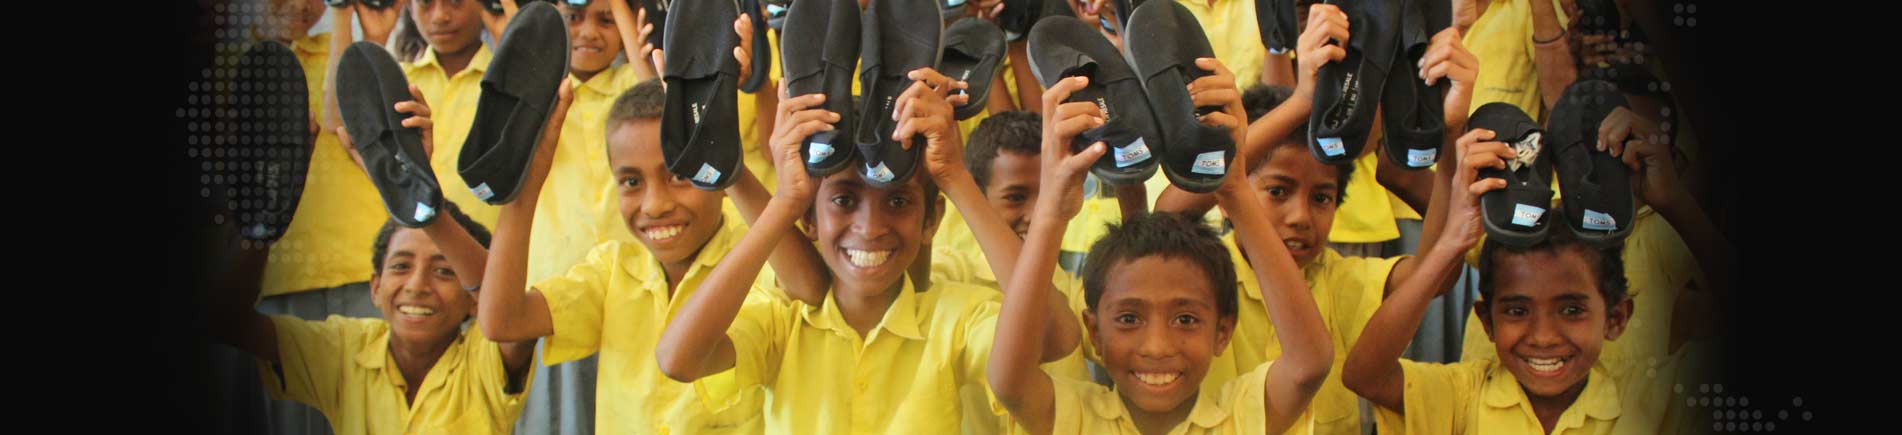 Smiling children with shoes